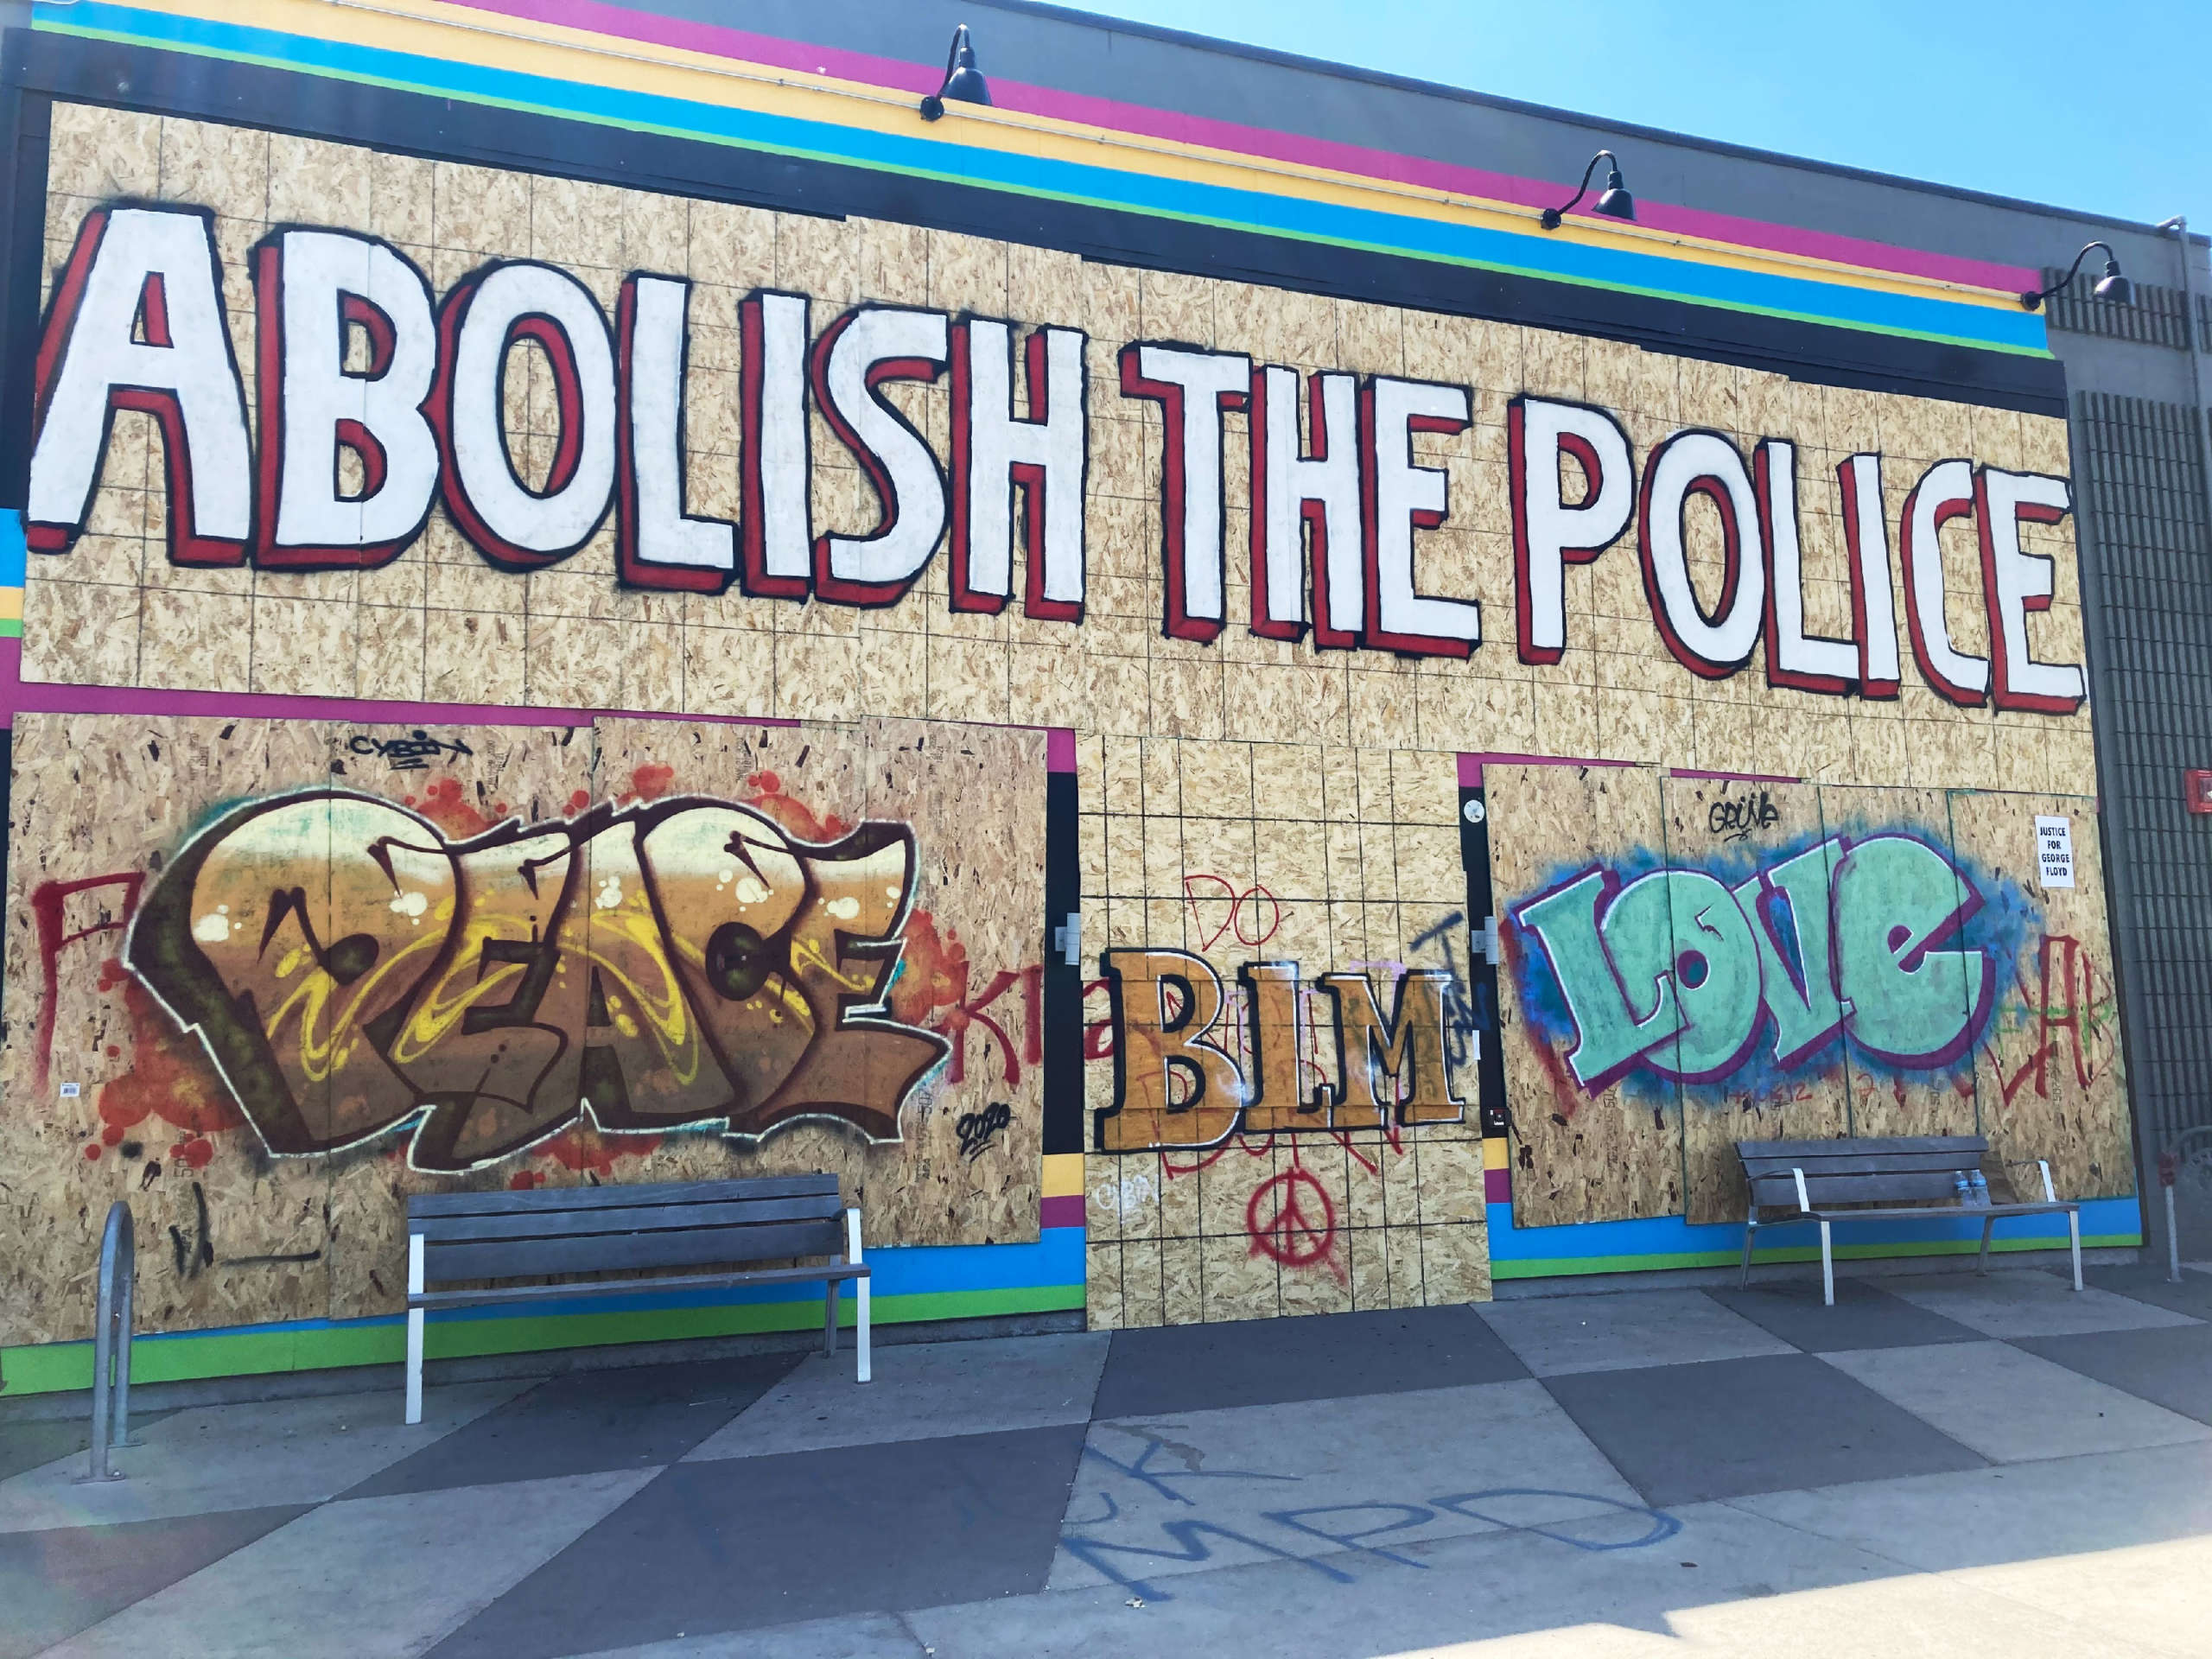 A mural near the police precinct building in south Minneapolis that was overrun and burned by protesters last week. Members of the city council are listening to police abolitionist groups and considering whether to disband the police department and replace officers with a “non-violent” public safety office.